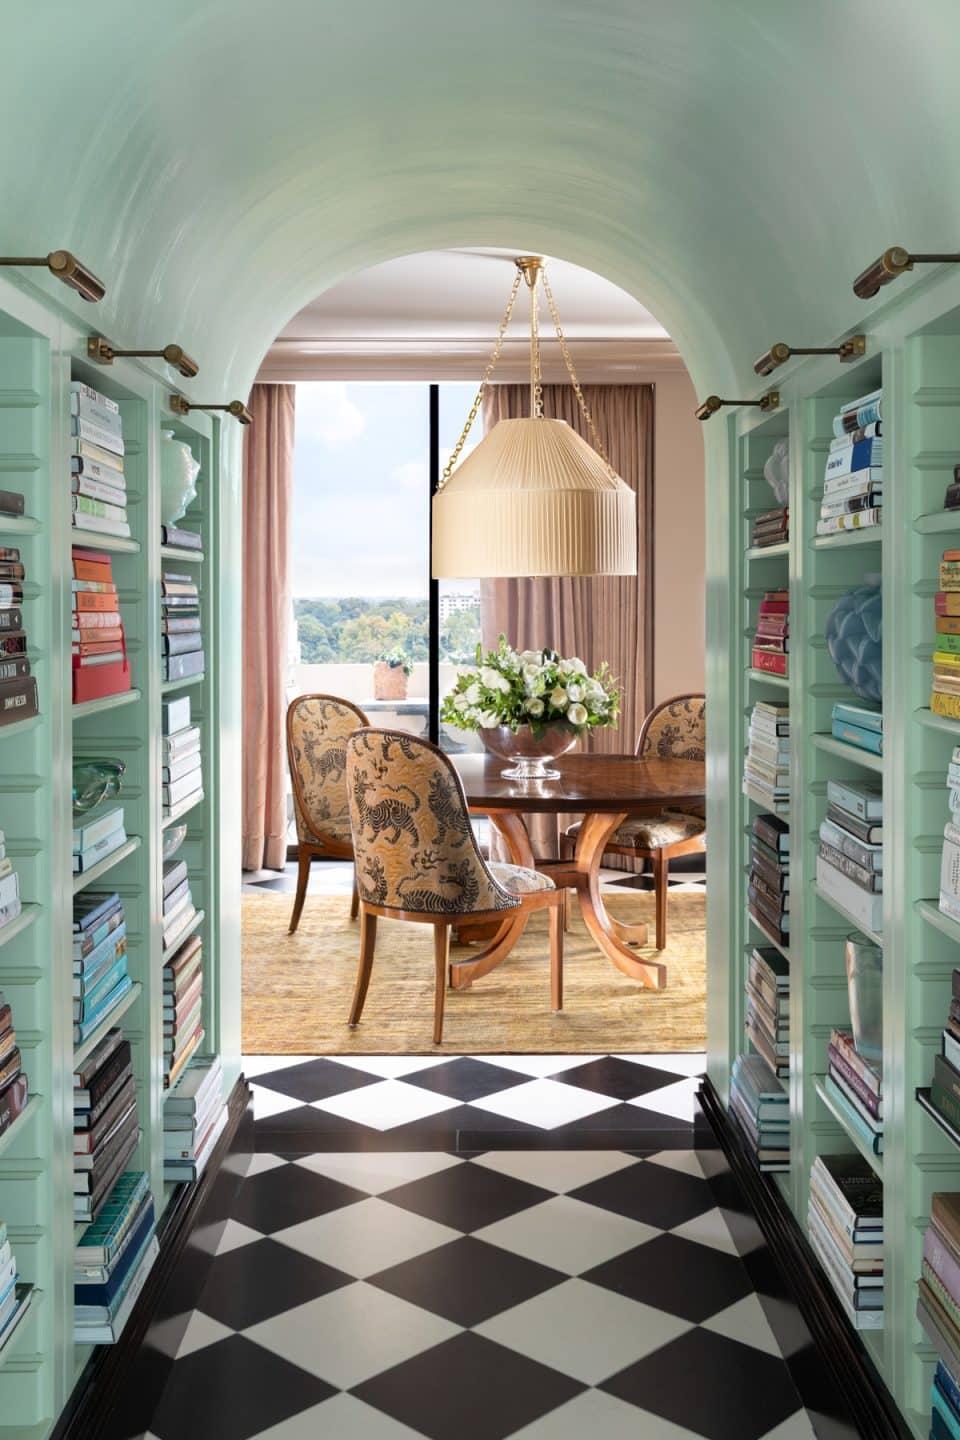 French Art Deco Meets Bermuda Style in This Glam Atlanta Apartment by Beth Webb